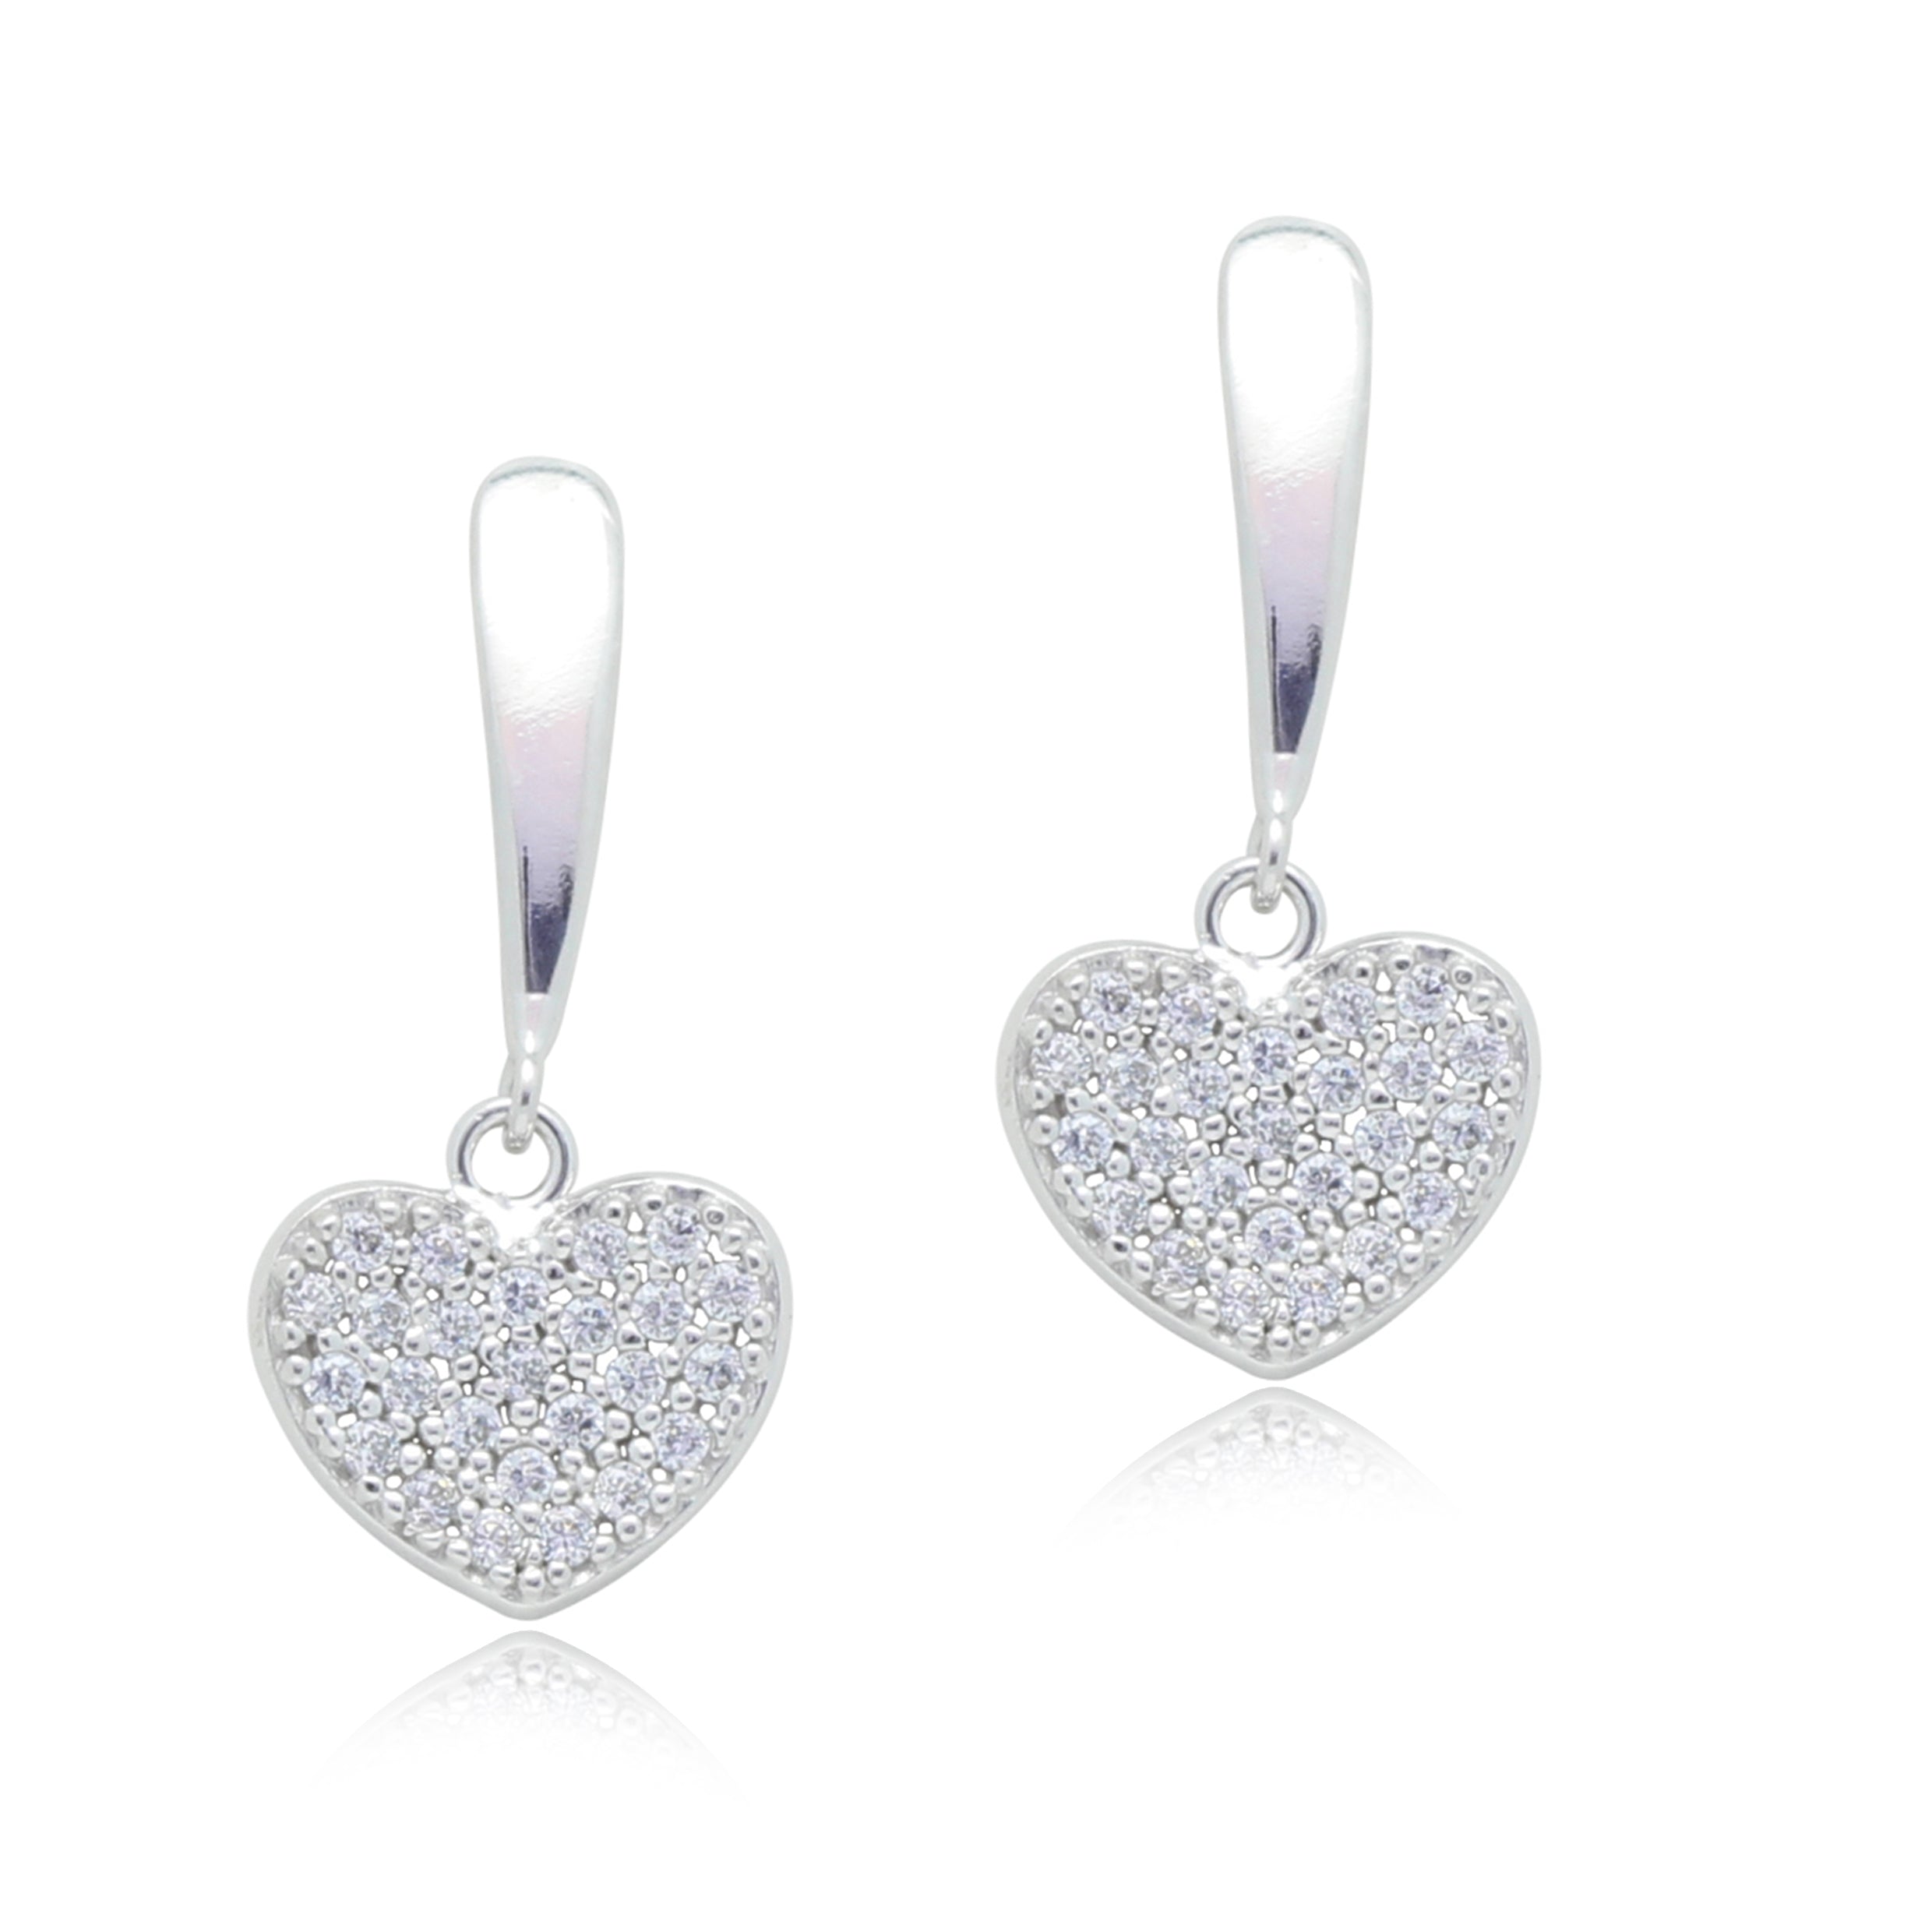 Heart Earrings in 14k White Gold with CZ Pave